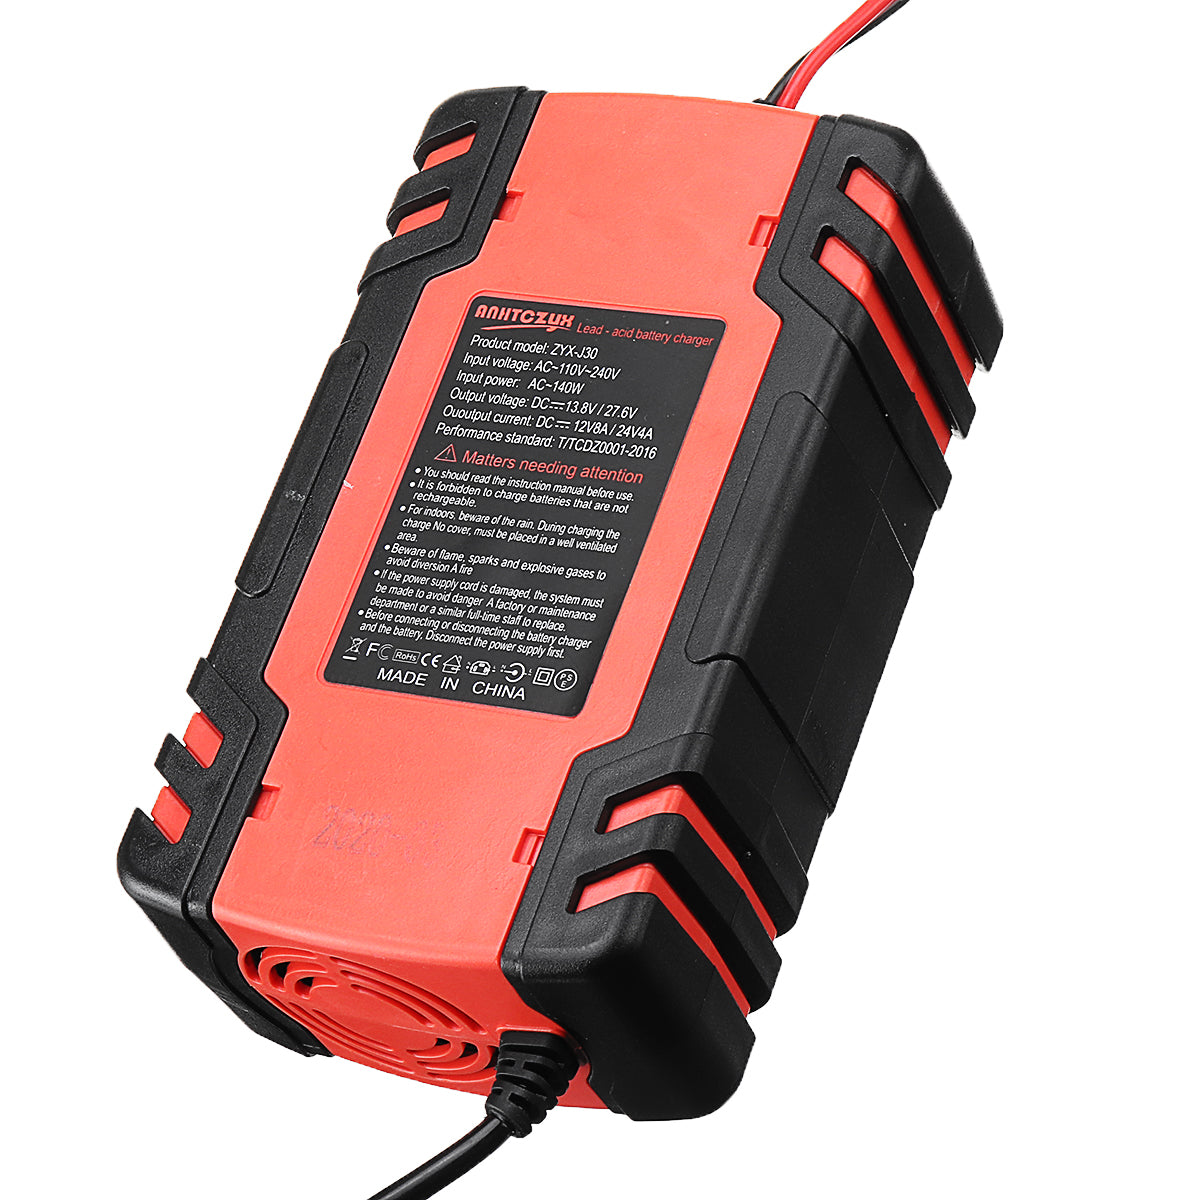 Salmon 12/24V 8A/4A Multi-function Touch Screen Pulse Repair LCD Battery Charger For Car Motorcycle Lead Acid Battery Agm Gel Wet For Car/Motorcycle/Truck